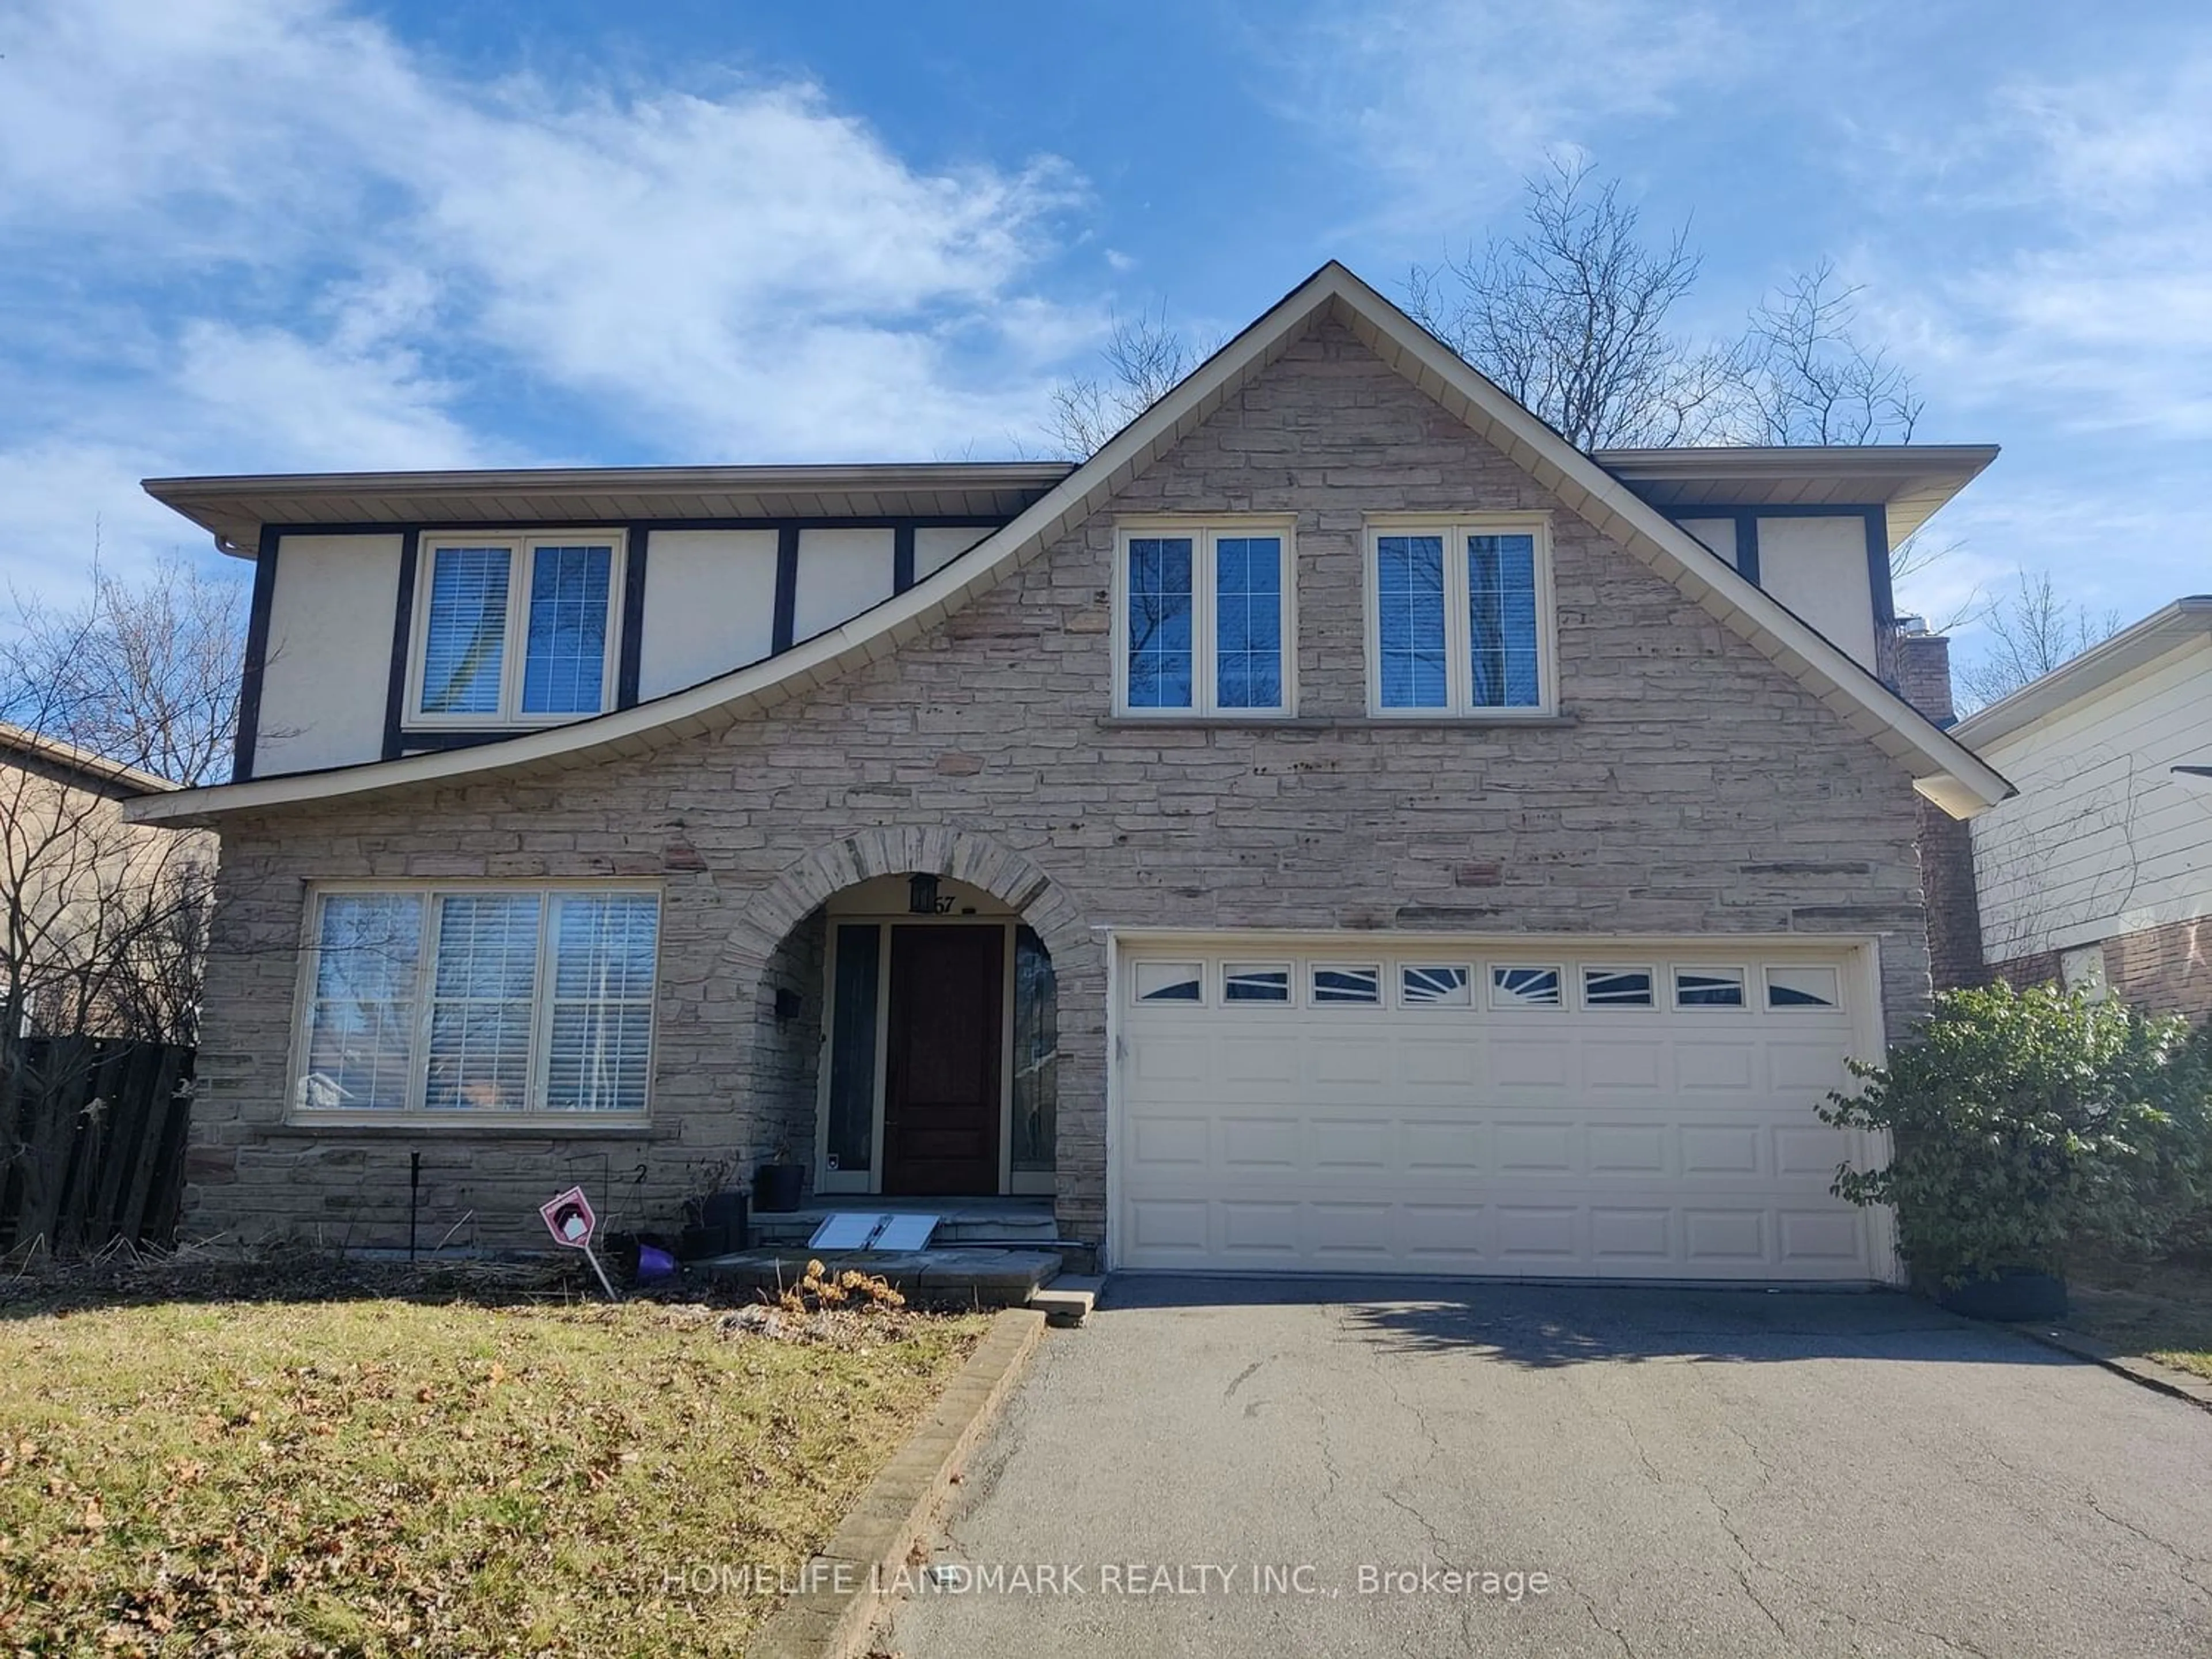 Home with stone exterior material for 67 Carlton Rd, Markham Ontario L3R 1Z7